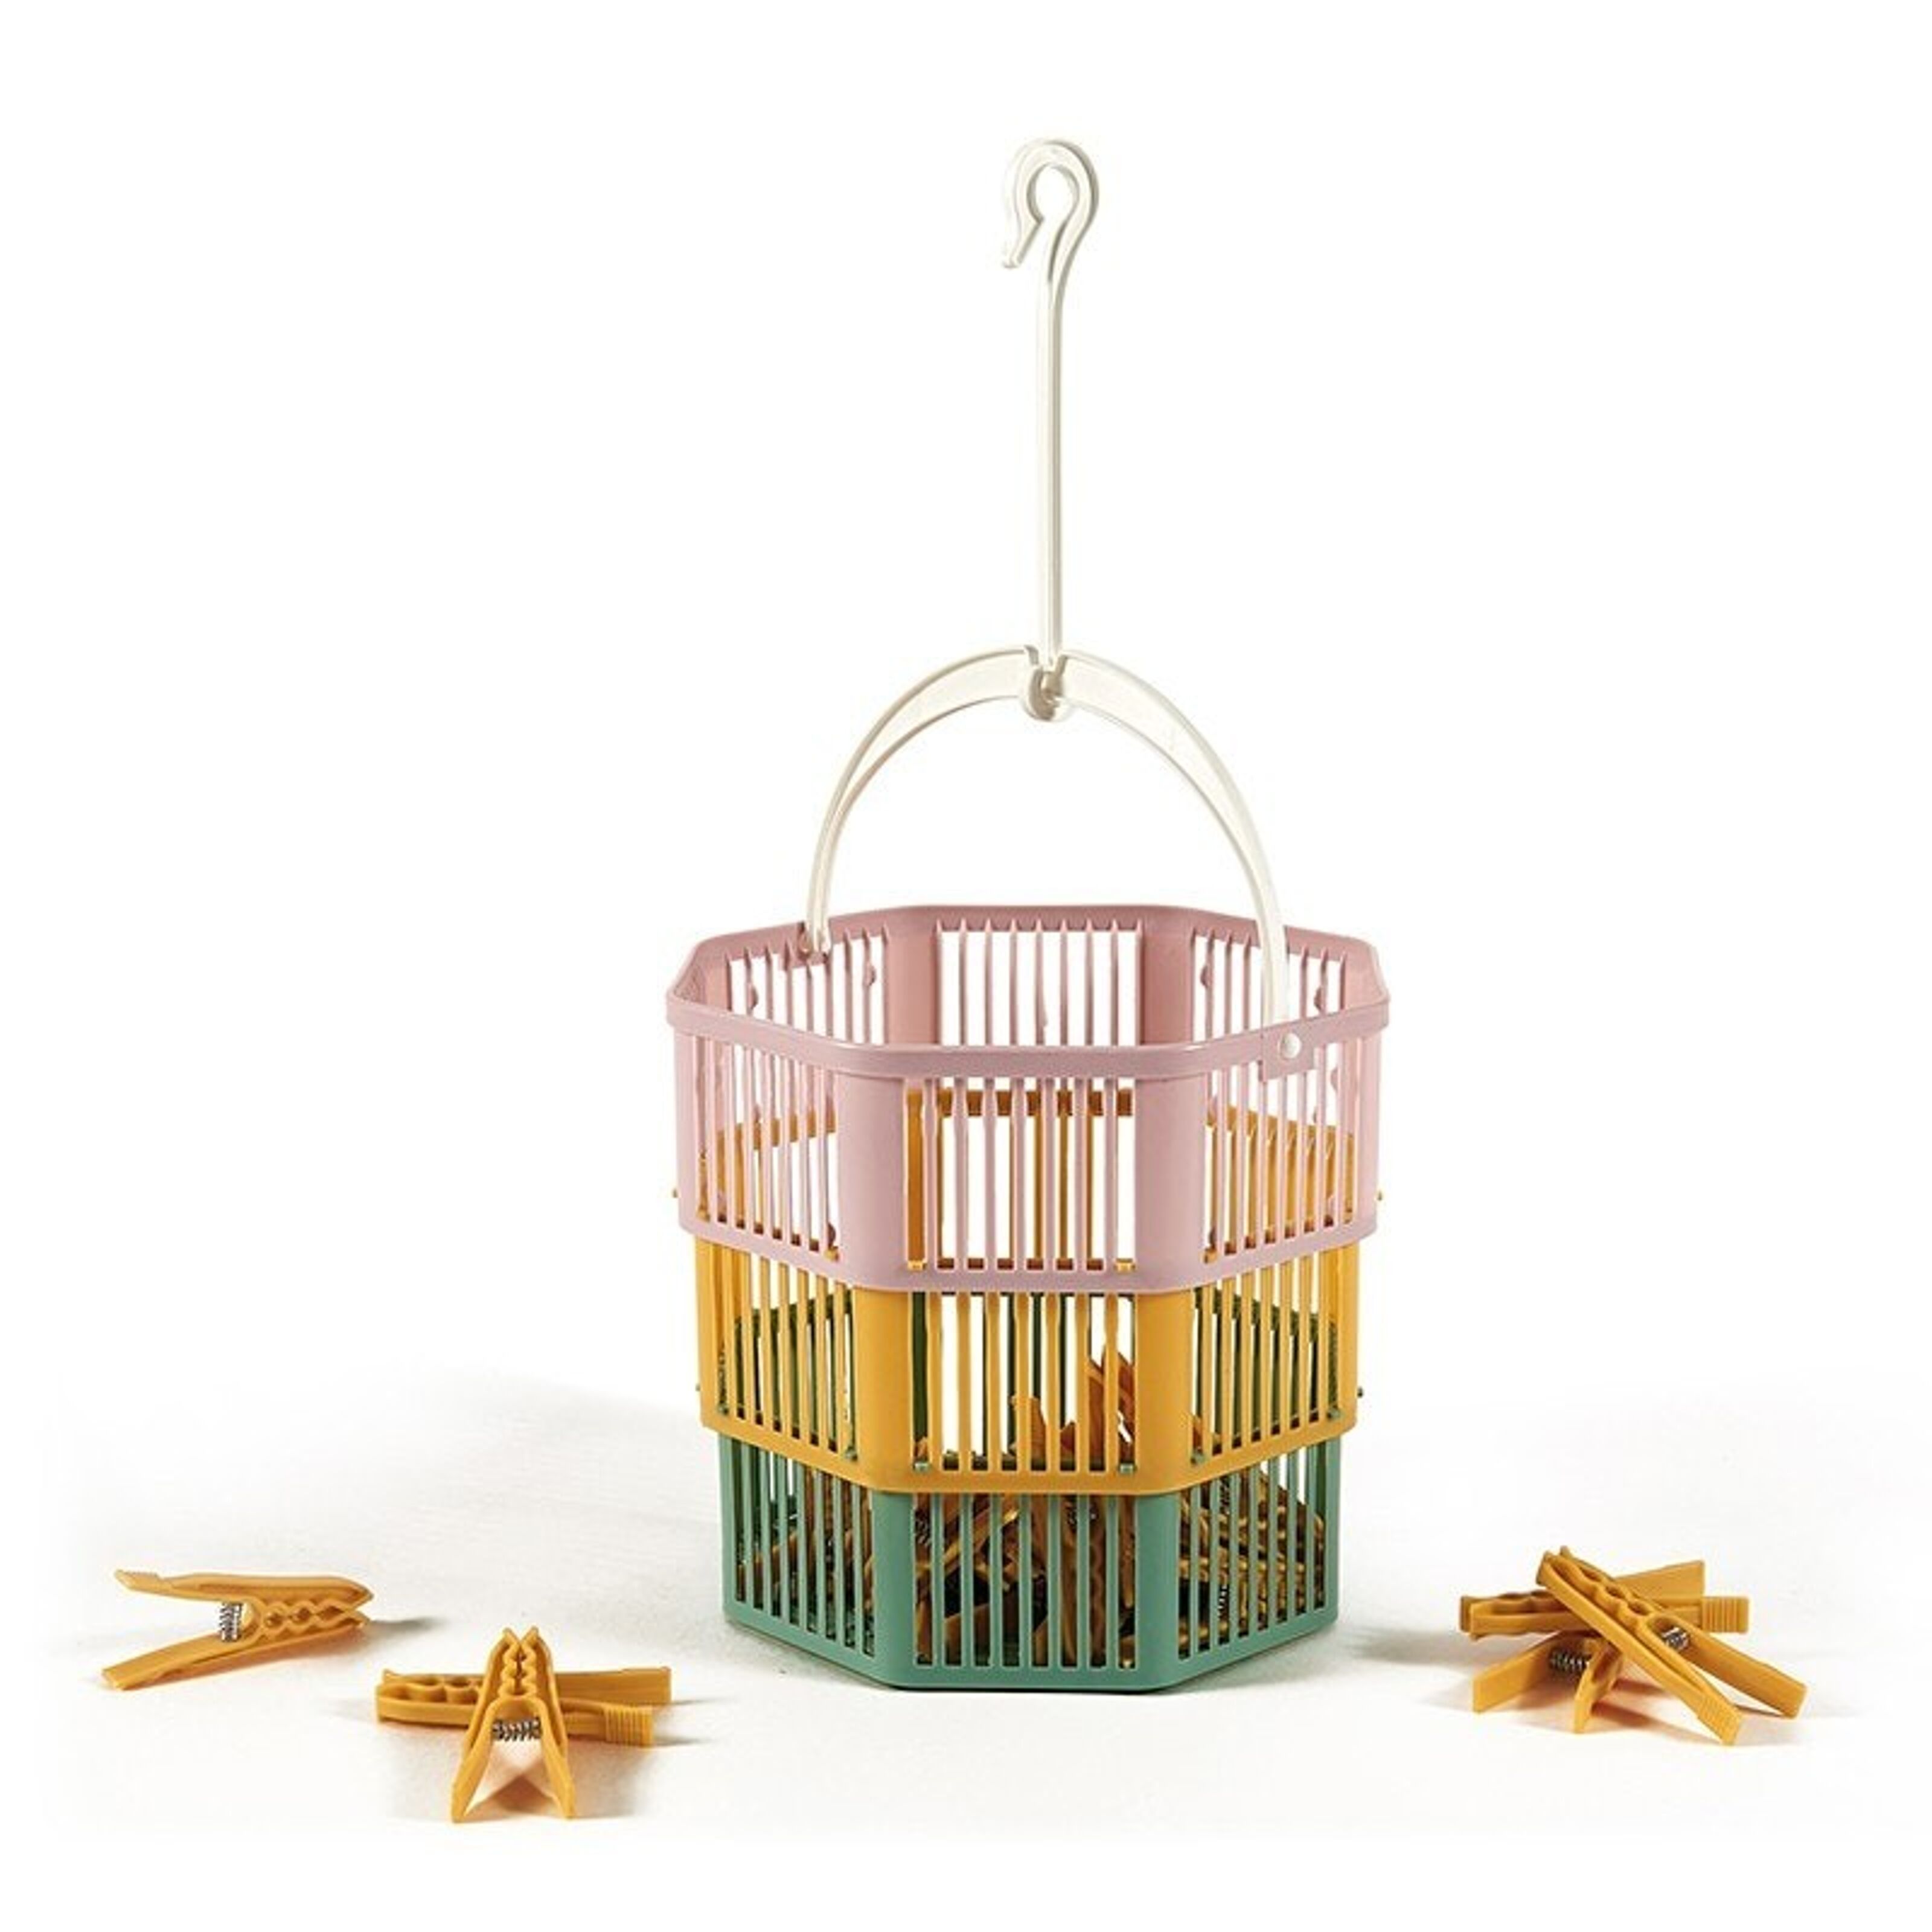 Buy wholesale 3 BANDS PEGS BASKET WITH 30 MINIPINS